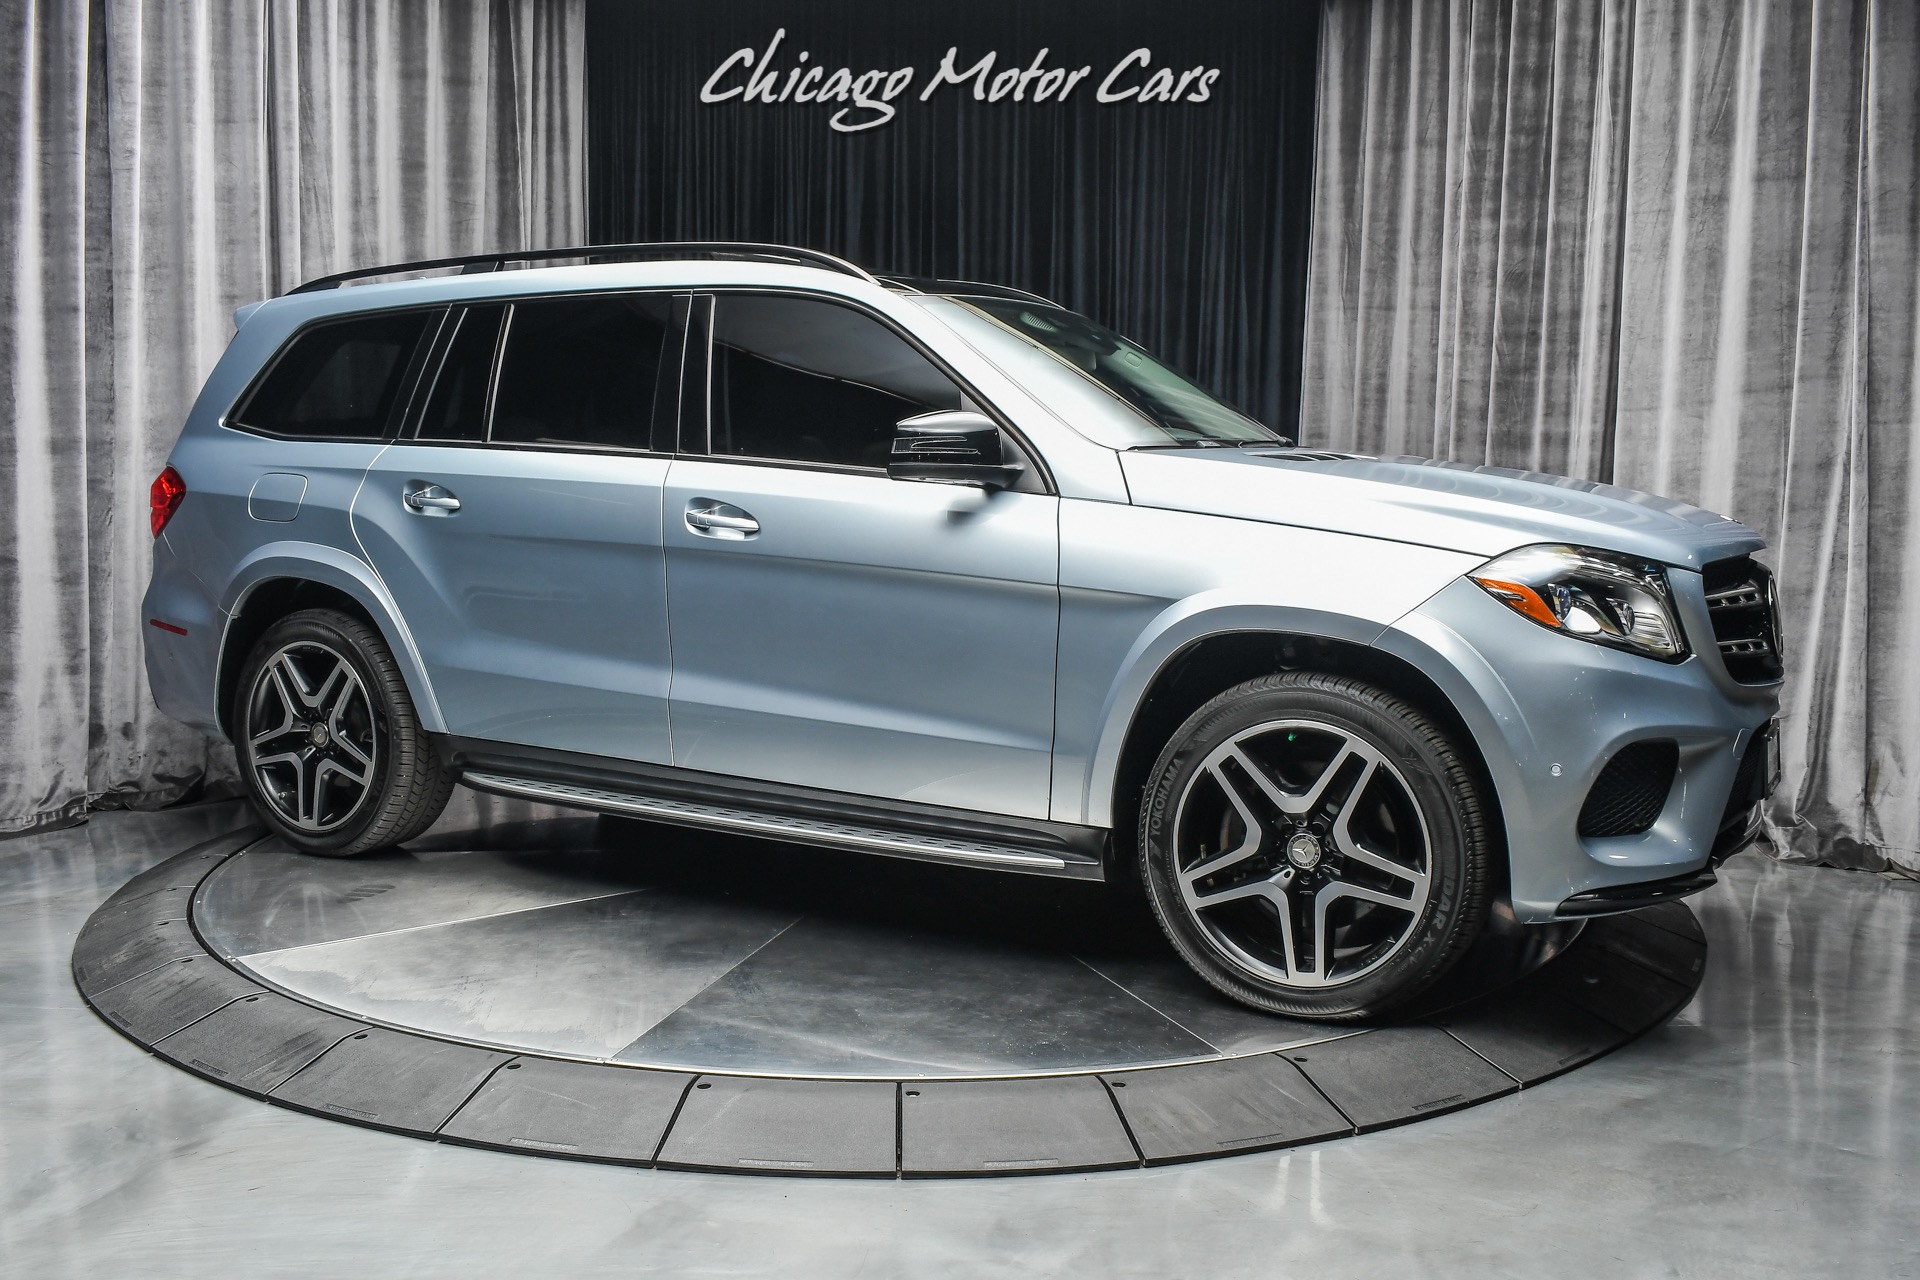 Used-2017-Mercedes-Benz-GLS550-4-Matic-SUV-104k-MSRP-SPECIAL-ORDER-VEHICLE